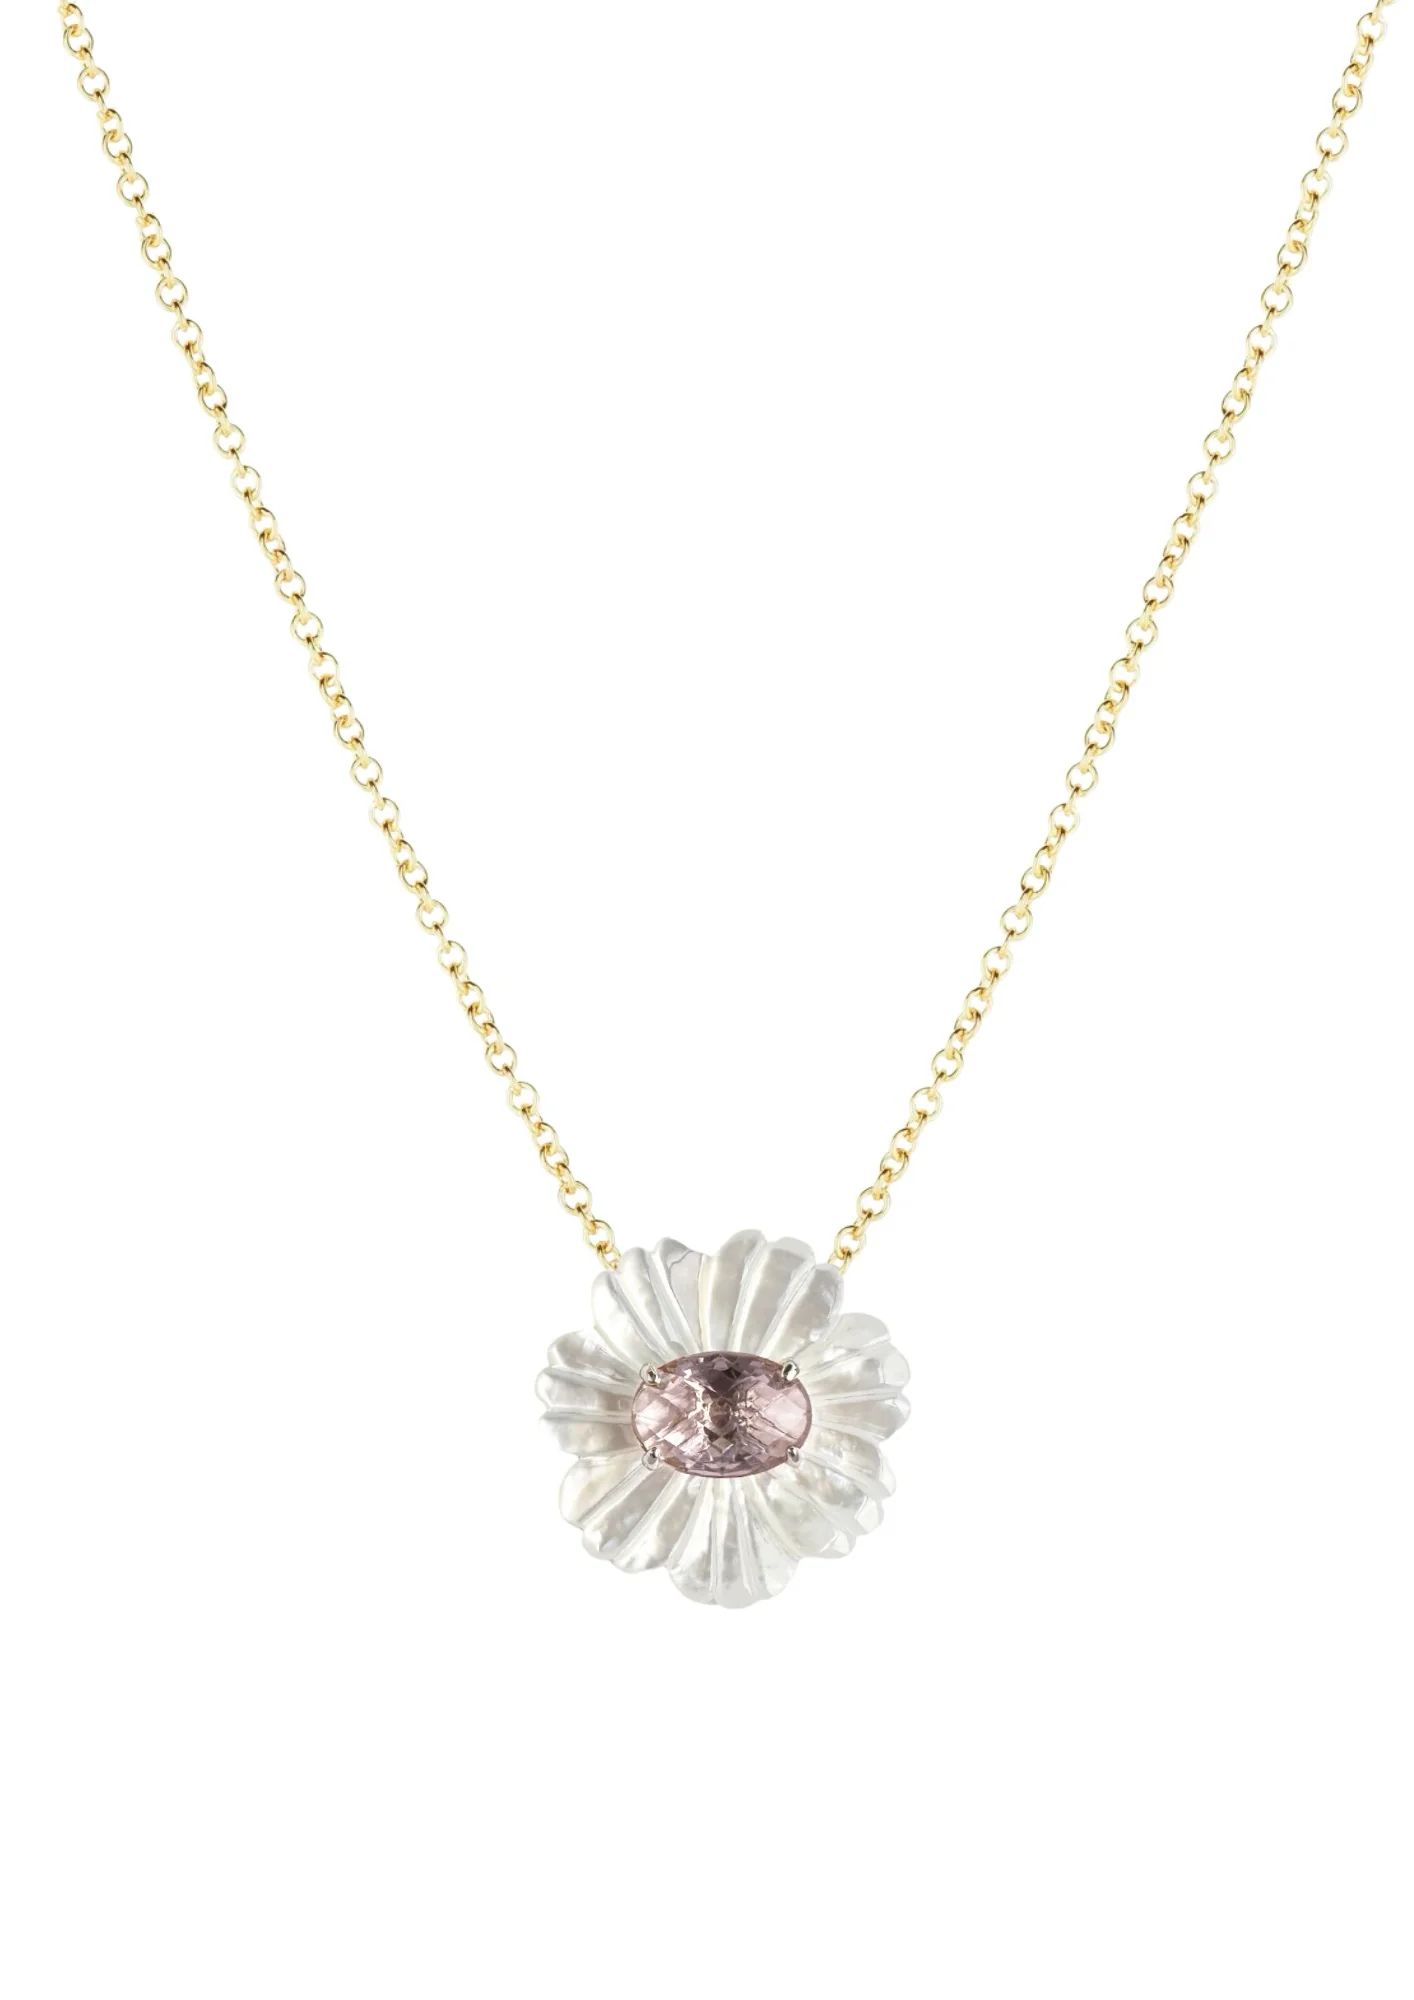 Mother of Pearl + Petal Pink Necklace | Nicola Bathie Jewelry